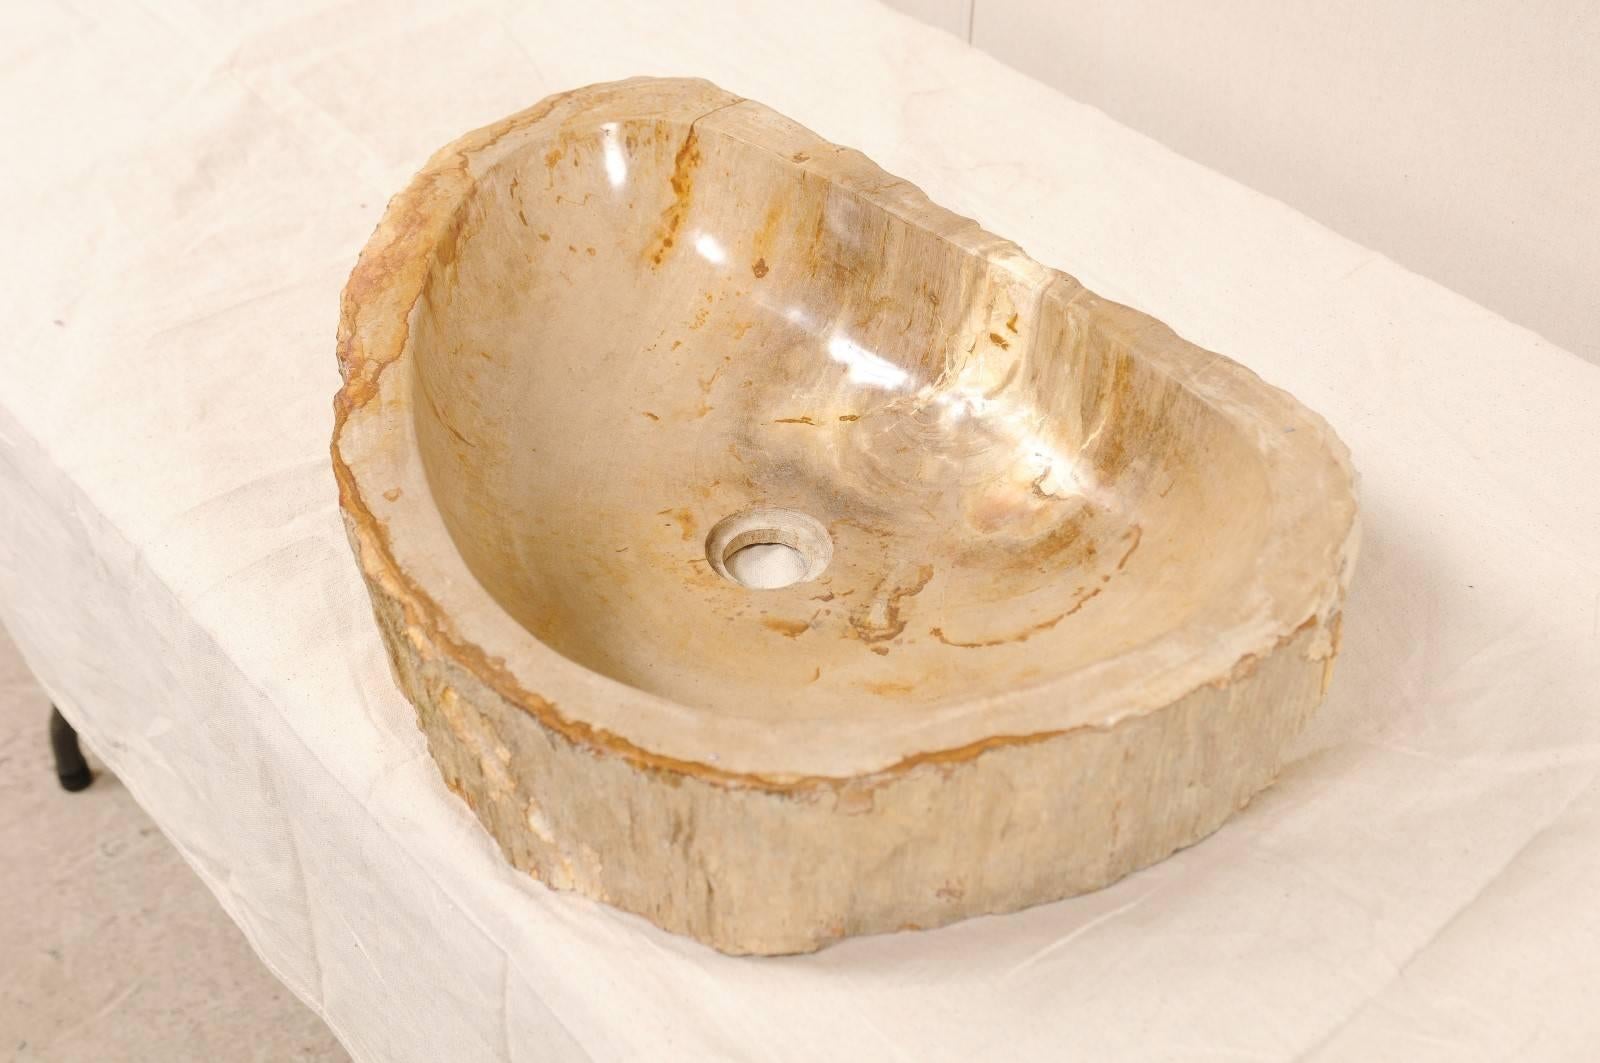 20th Century Polished Petrified Wood Sink in Cream and Beige Tones, Perfect for a Vanity